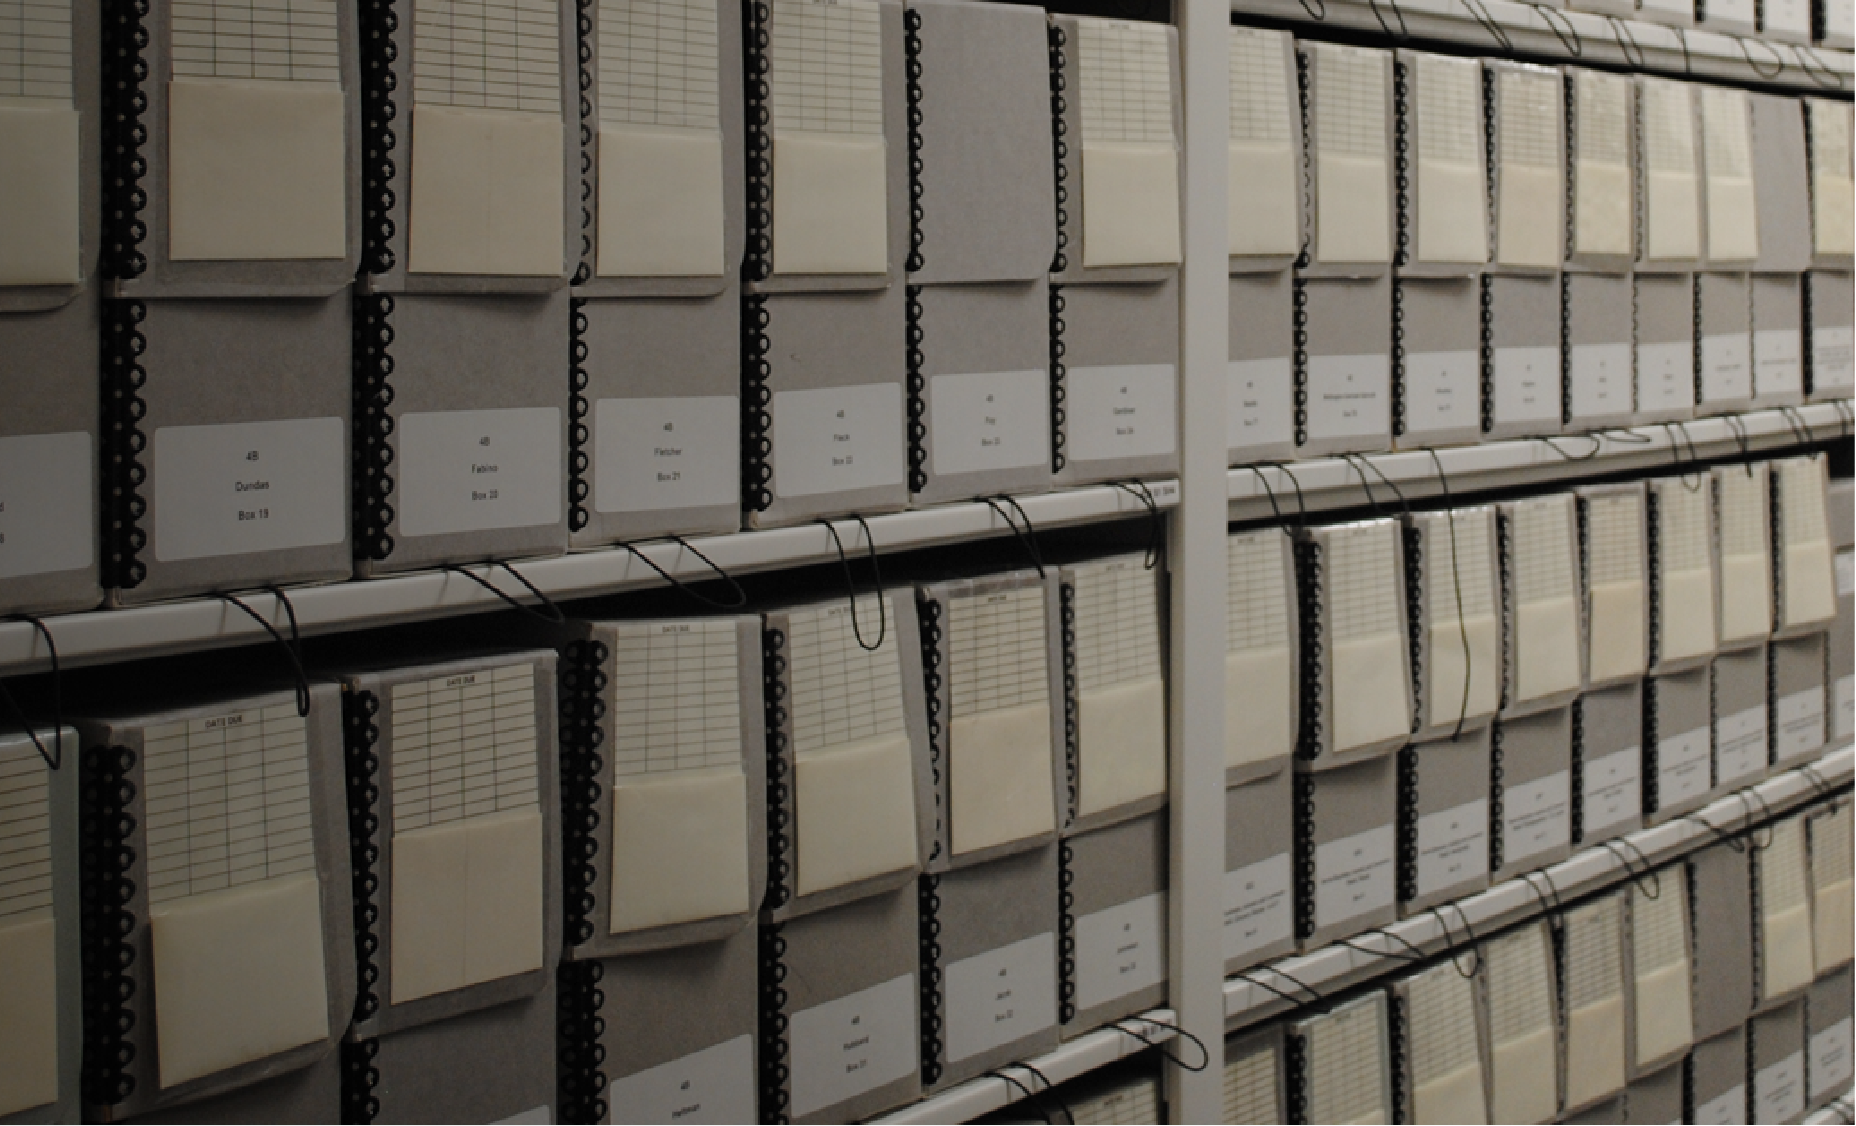 Photo of the Archives' collection in boxes on a shelf.